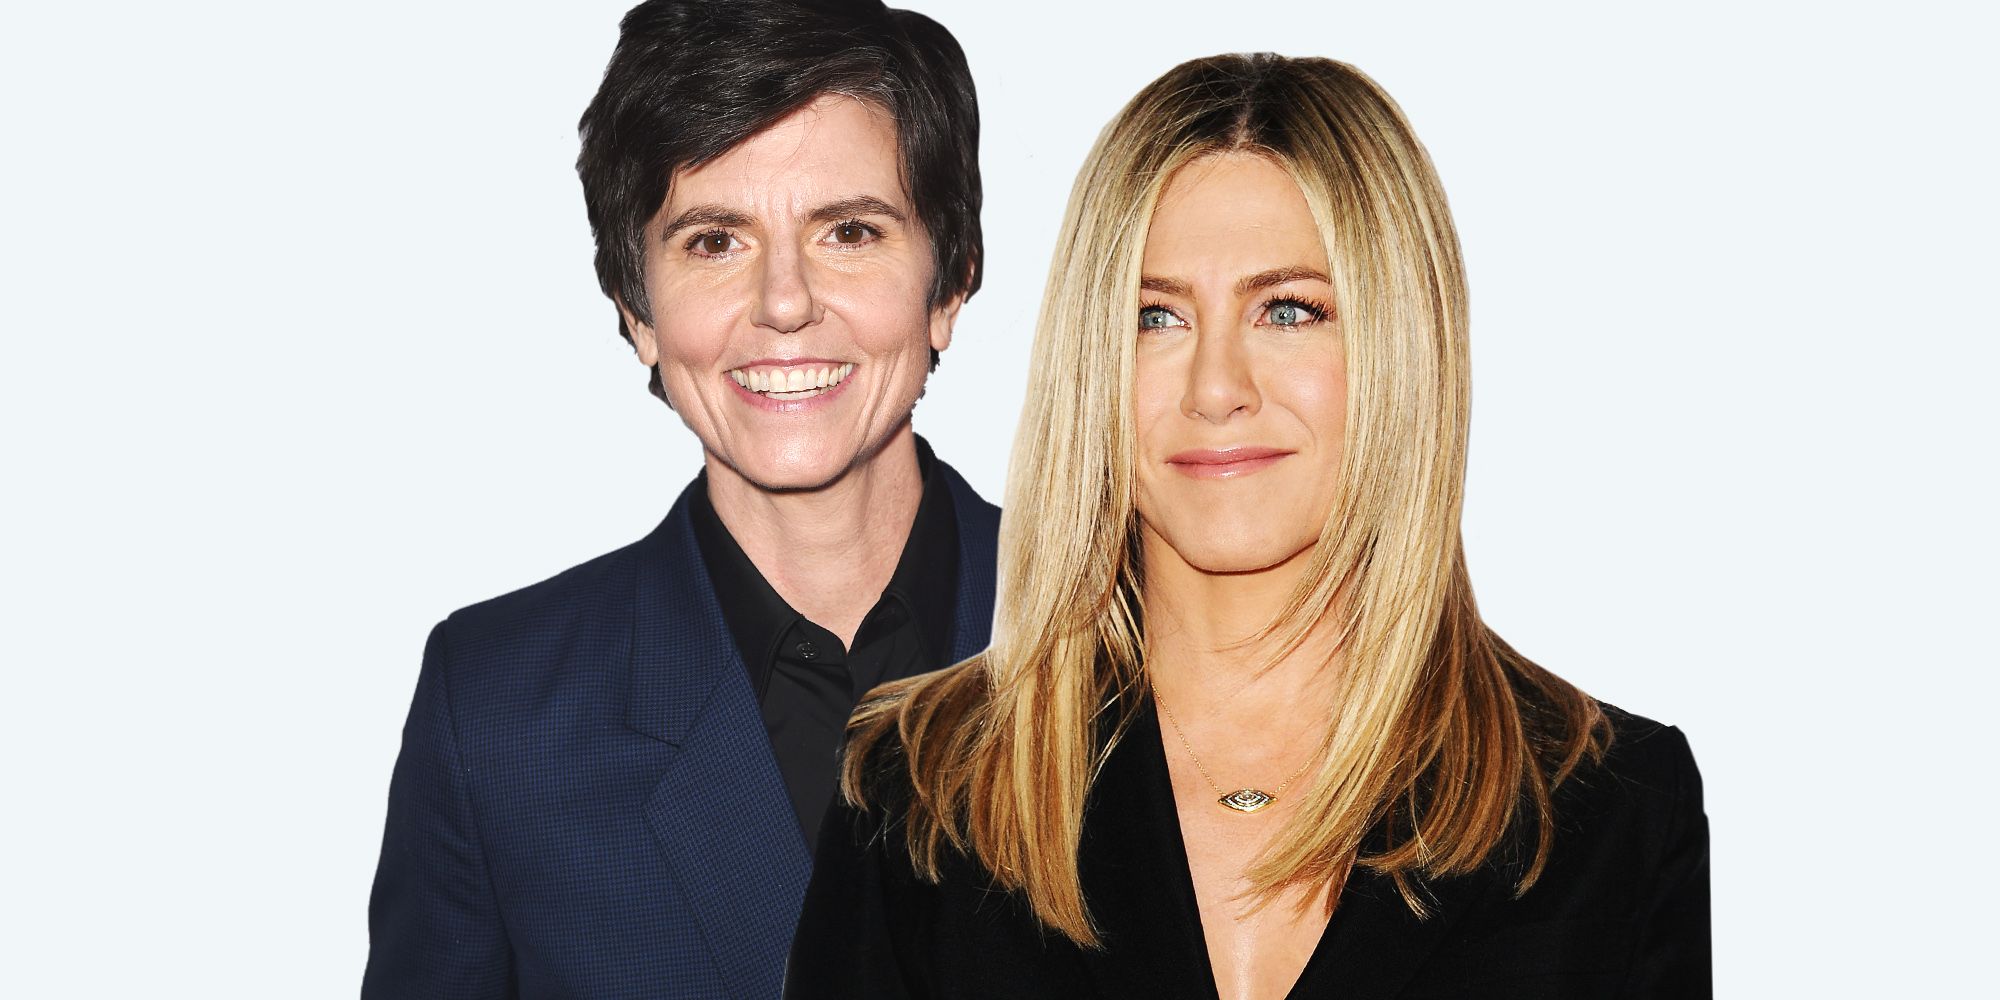 Jennifer Aniston and Tig Notaro to Make Netflix Great as First Spouses pic